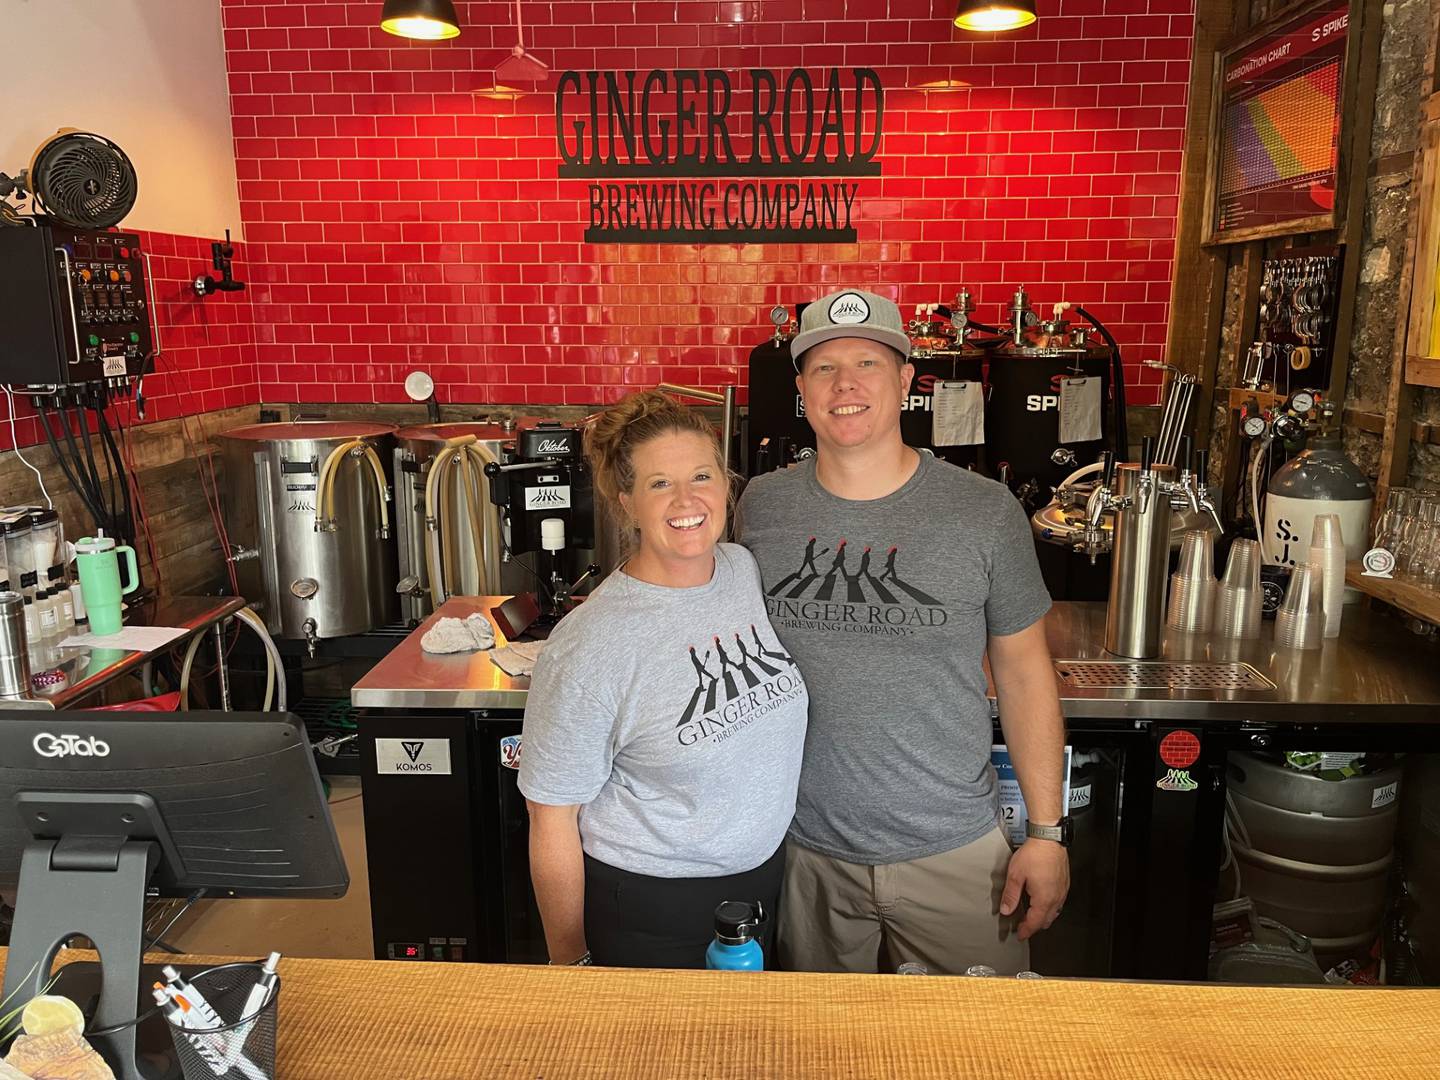 Amy and Dan Stash recently opened Ginger Road Brewing in downtown Utica.